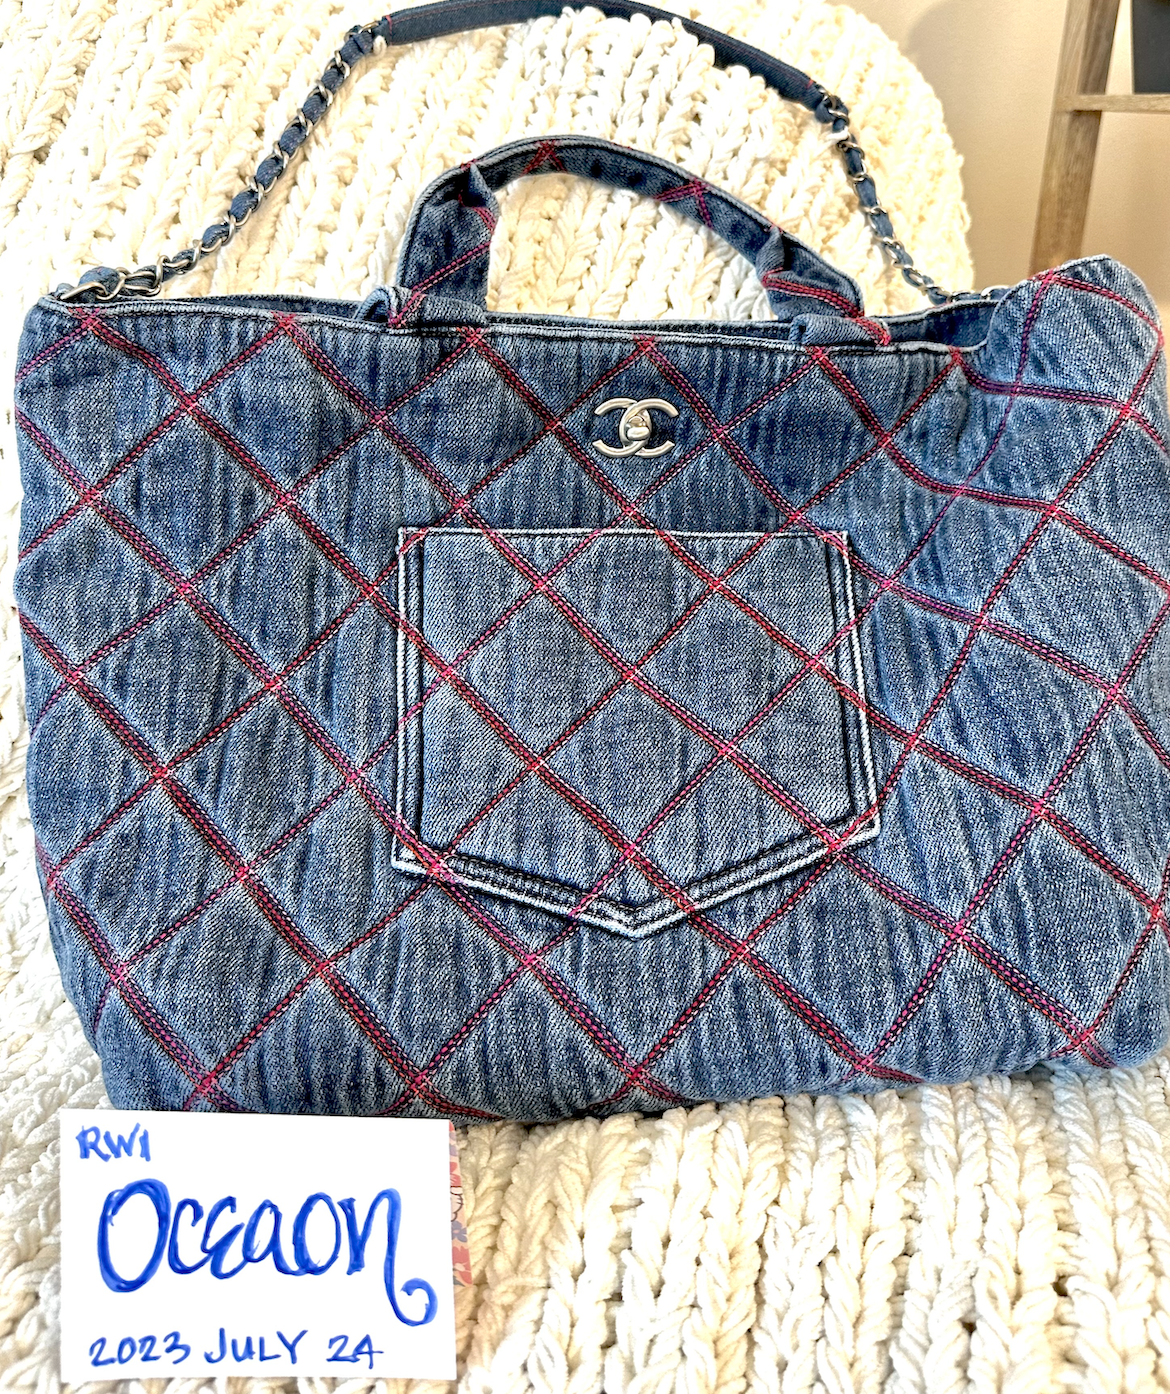 Chanel Coco Beach Denim Stitched, Tote Dust bag only